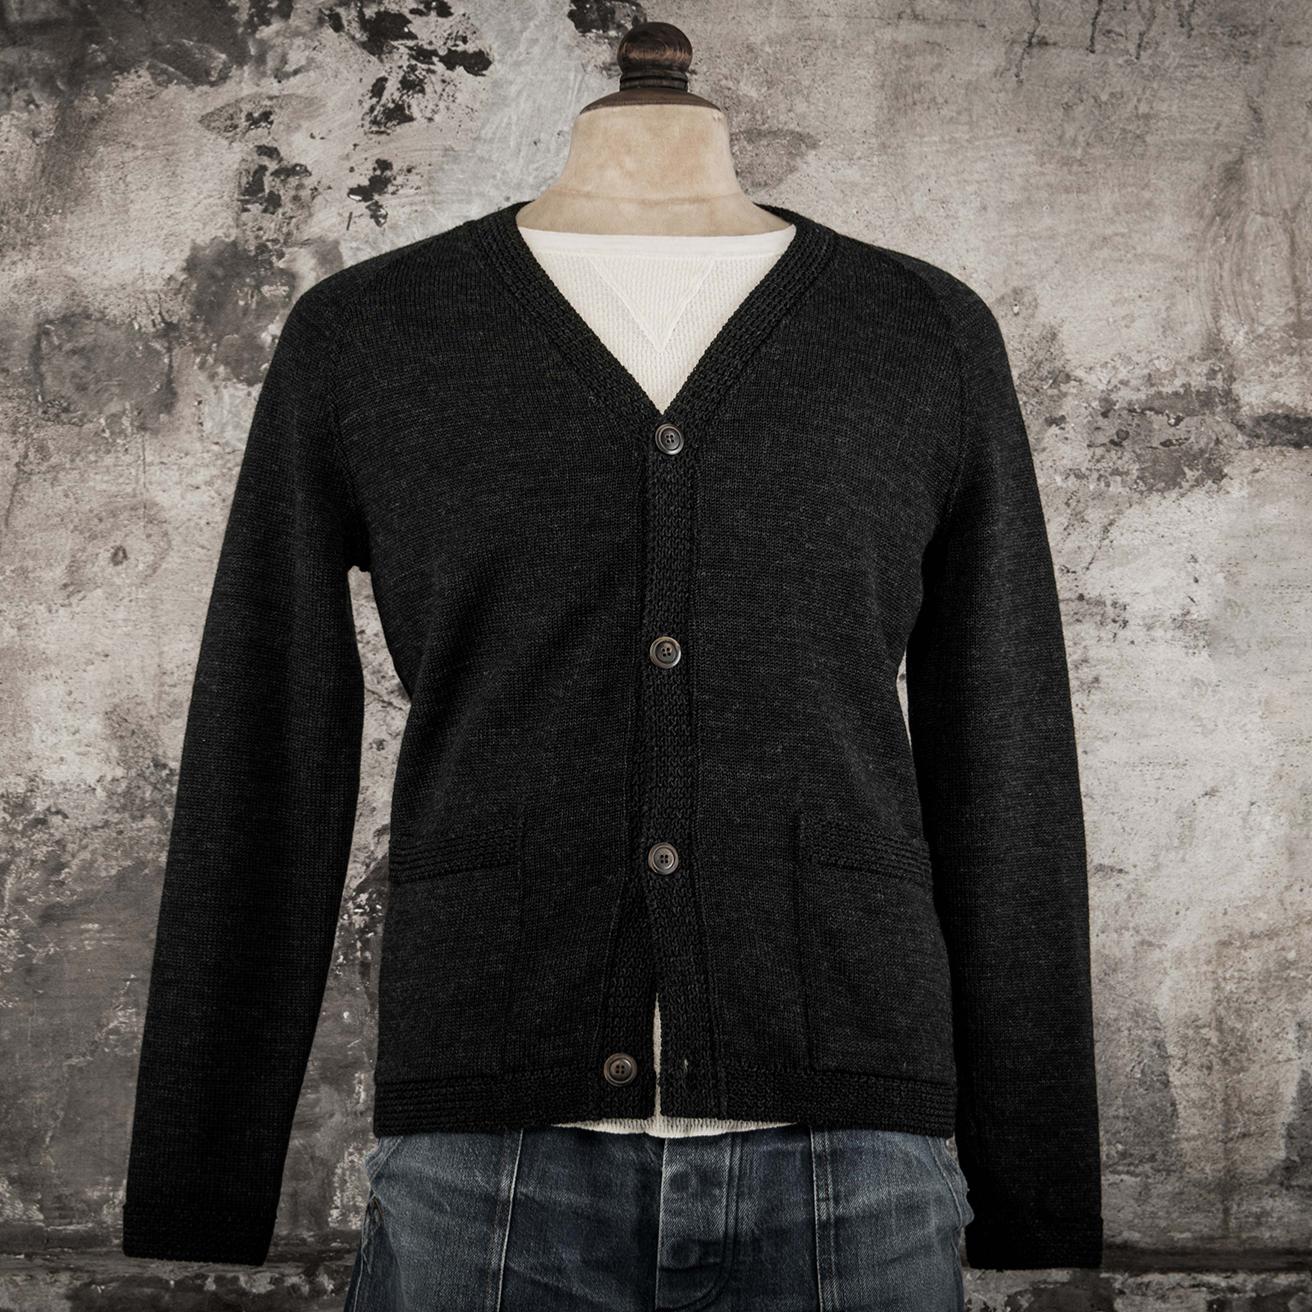 THE CARDIGAN "P'TIT LOUIS" CHARCOAL